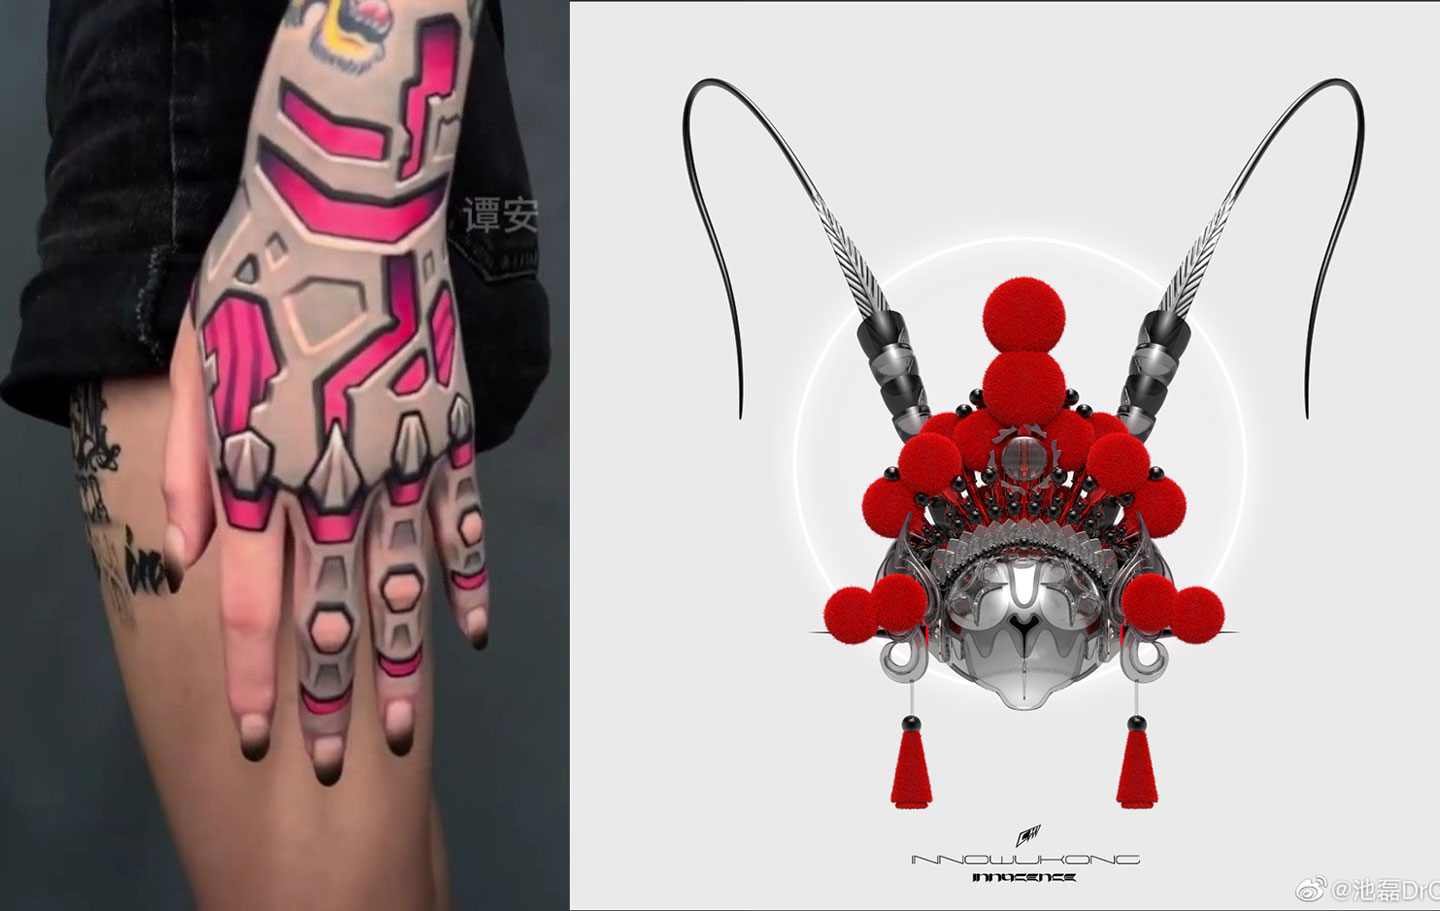 Cyberpunk can mean everything from tattoos to digital collectibles